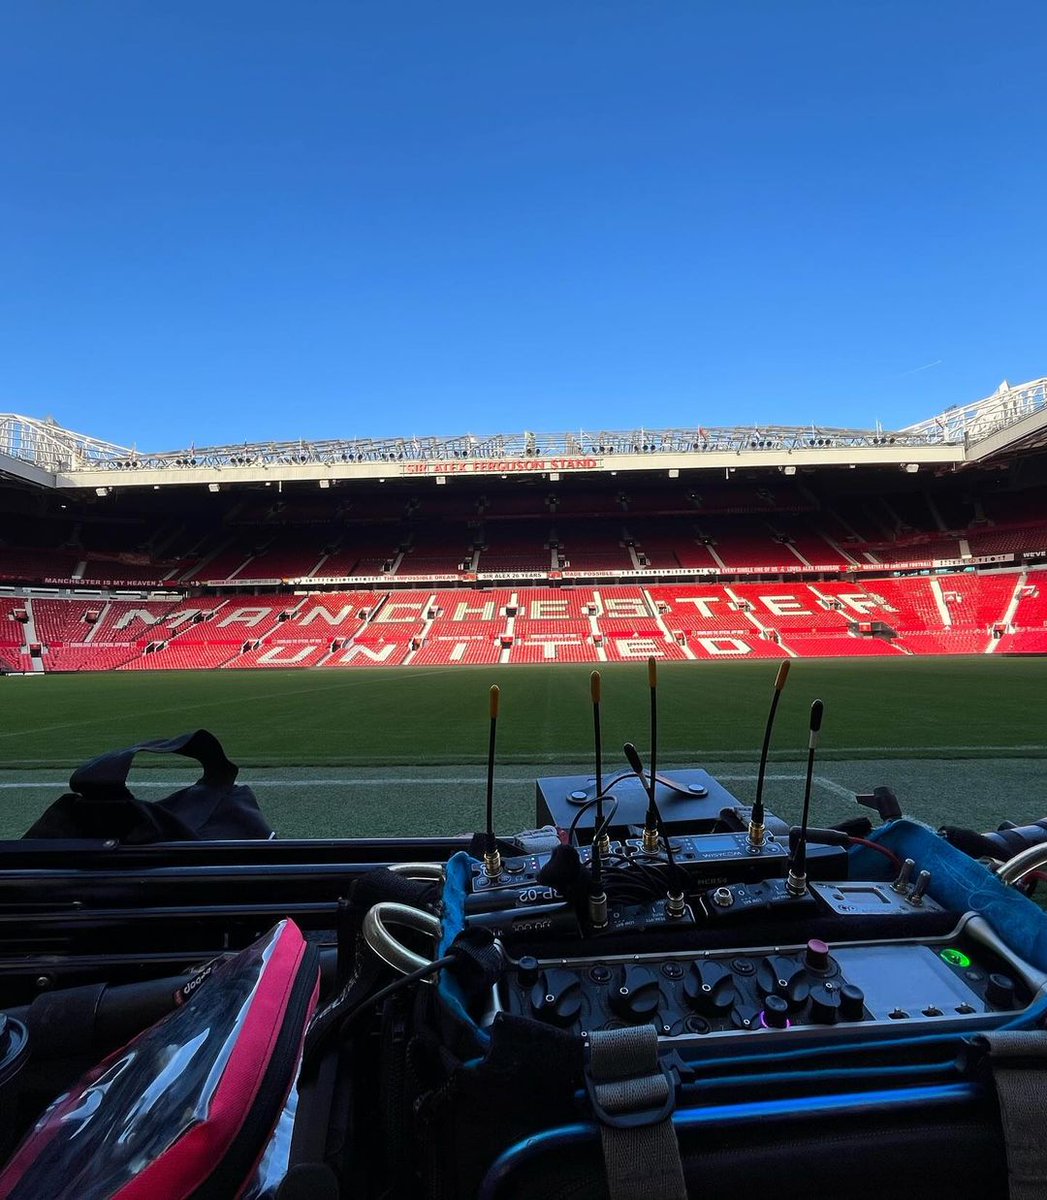 Our tenants Fresh Audio North and @PauljMortlock collaborated on the recently released MUFC X THE STONE ROSES X ADIDAS promotional campaign. See below for some behind the scenes shots taken during the shoot, which took place at Old Trafford (📸- @freshaudionorth)